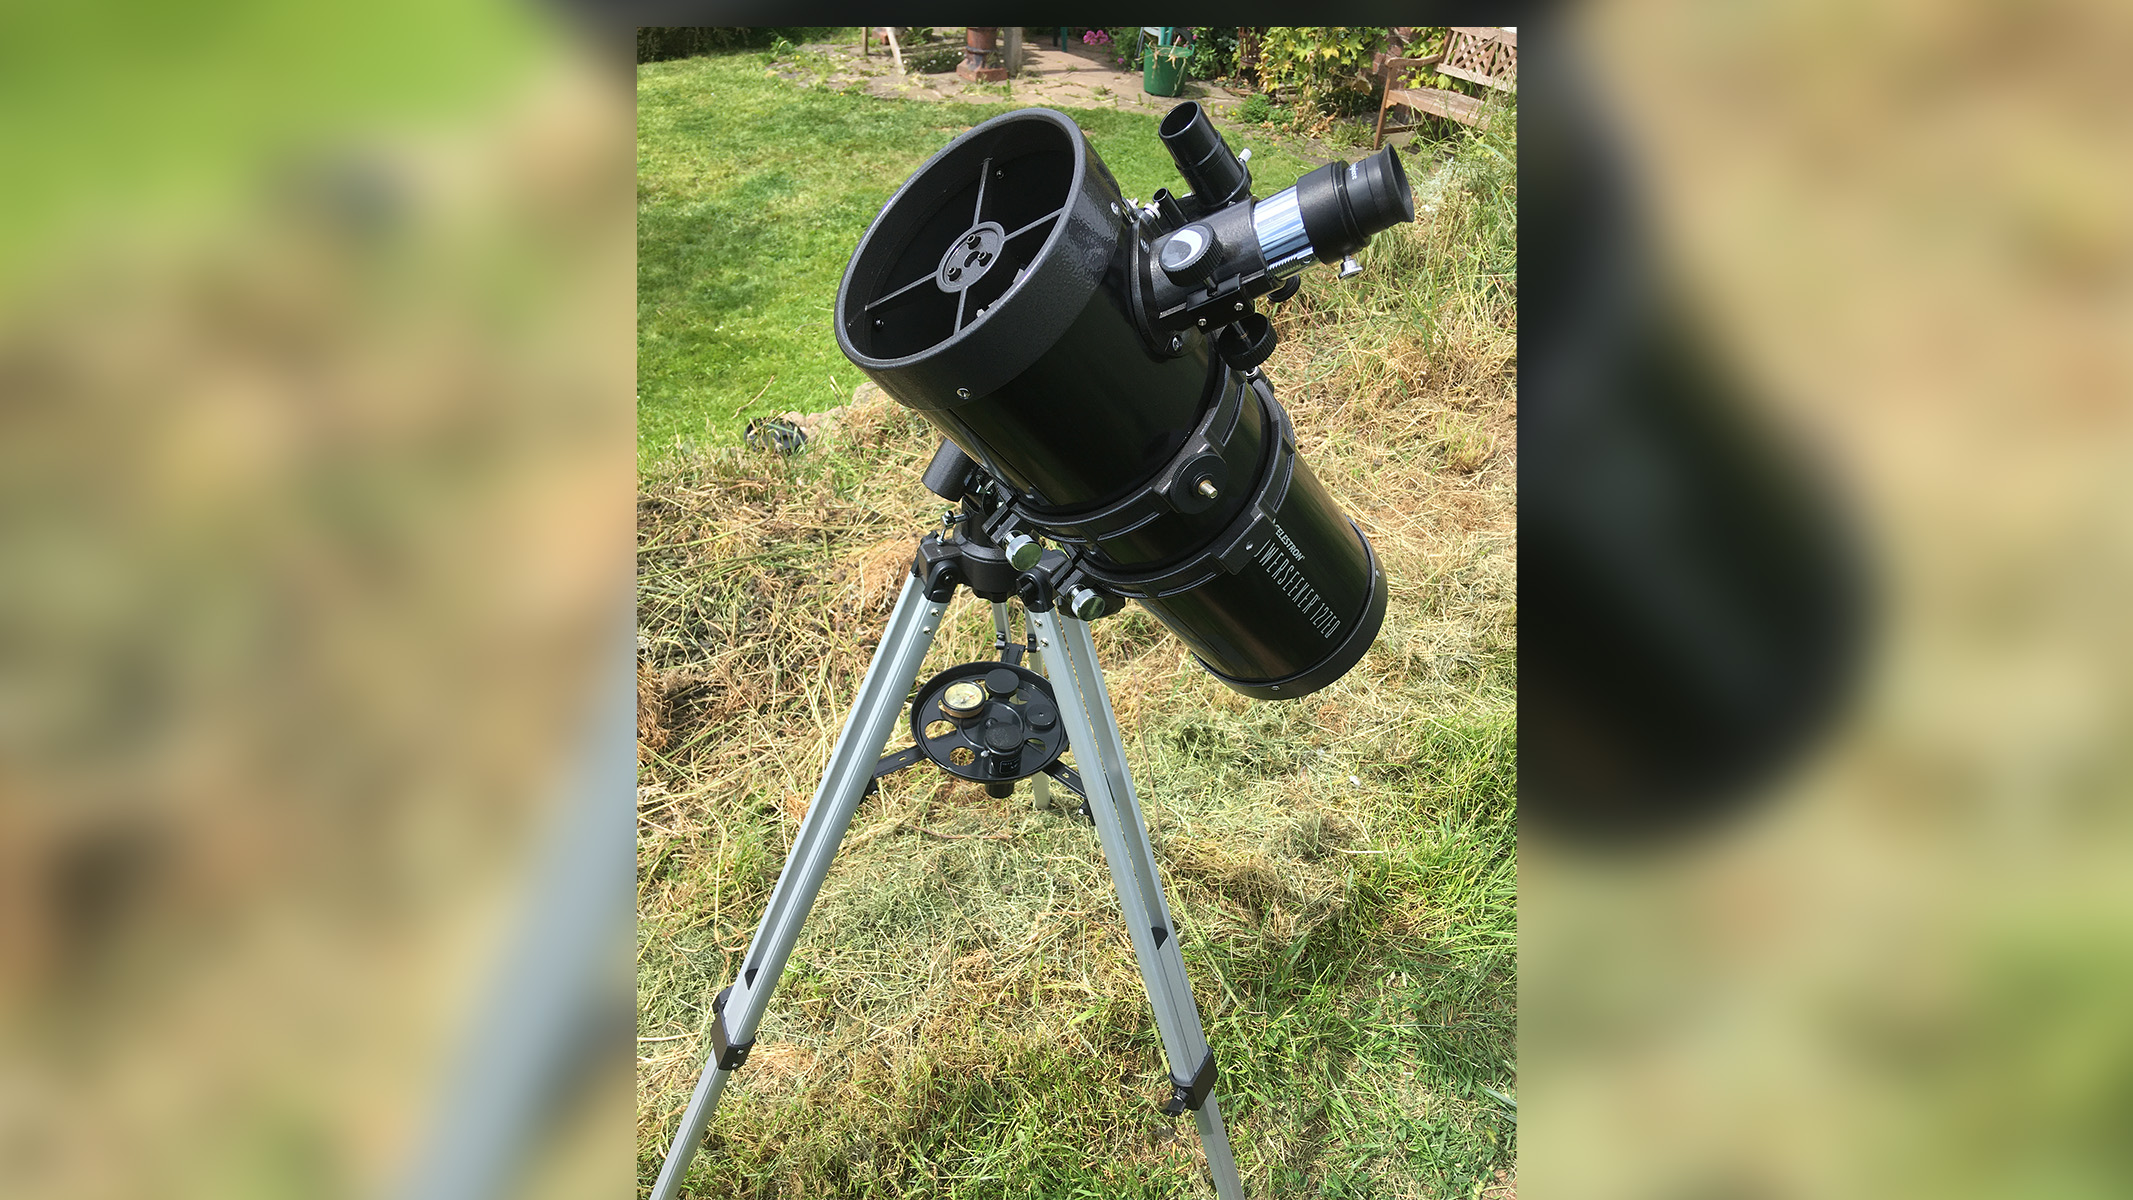 aceleración cortar a tajos tonto The Celestron PowerSeeker 127EQ is 30% off and arrives before new year |  Space